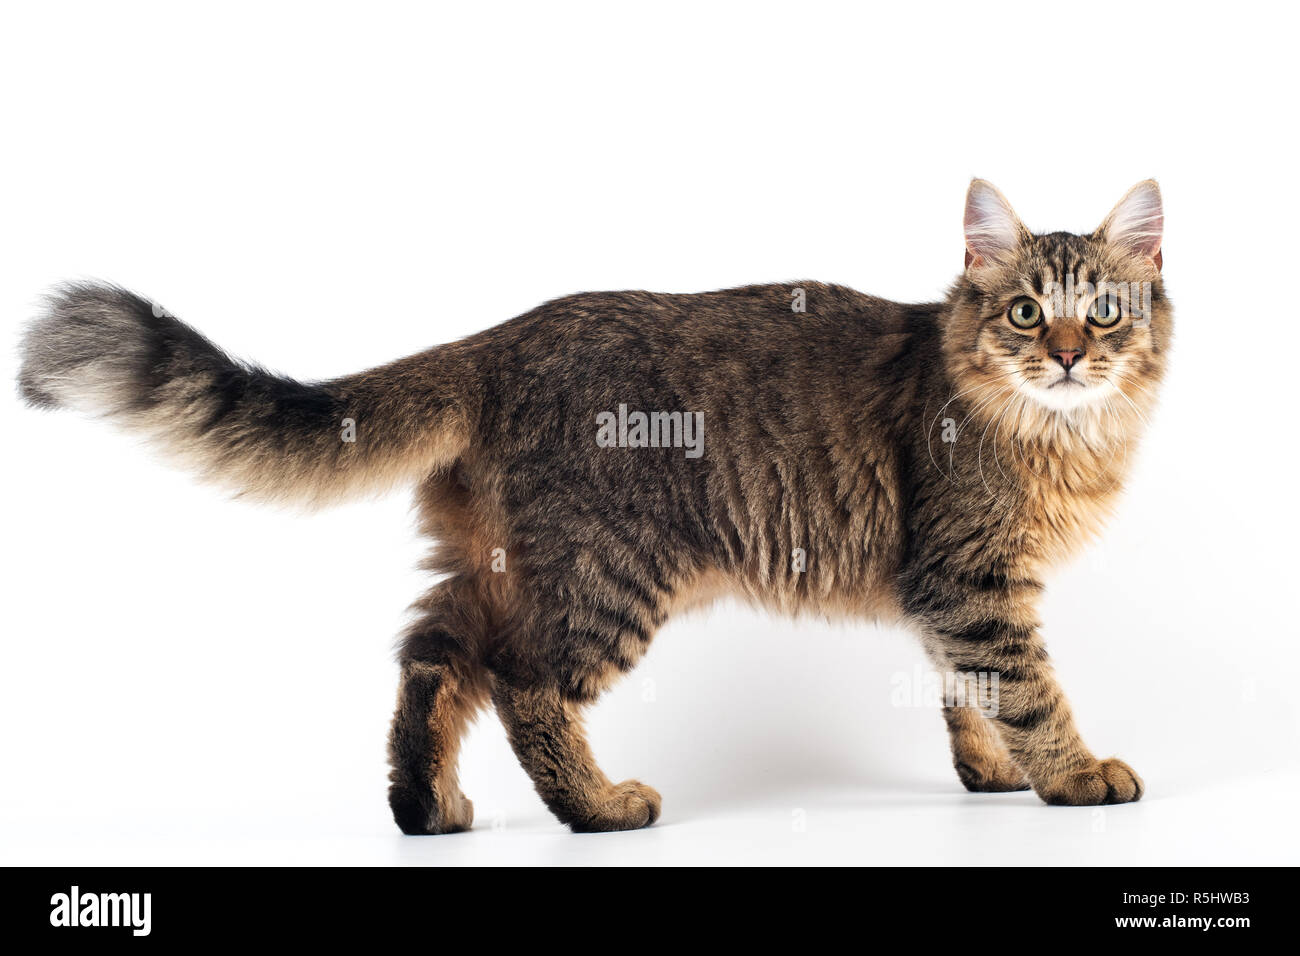 Pretty cat mixed breed on white background standing full body Stock Photo